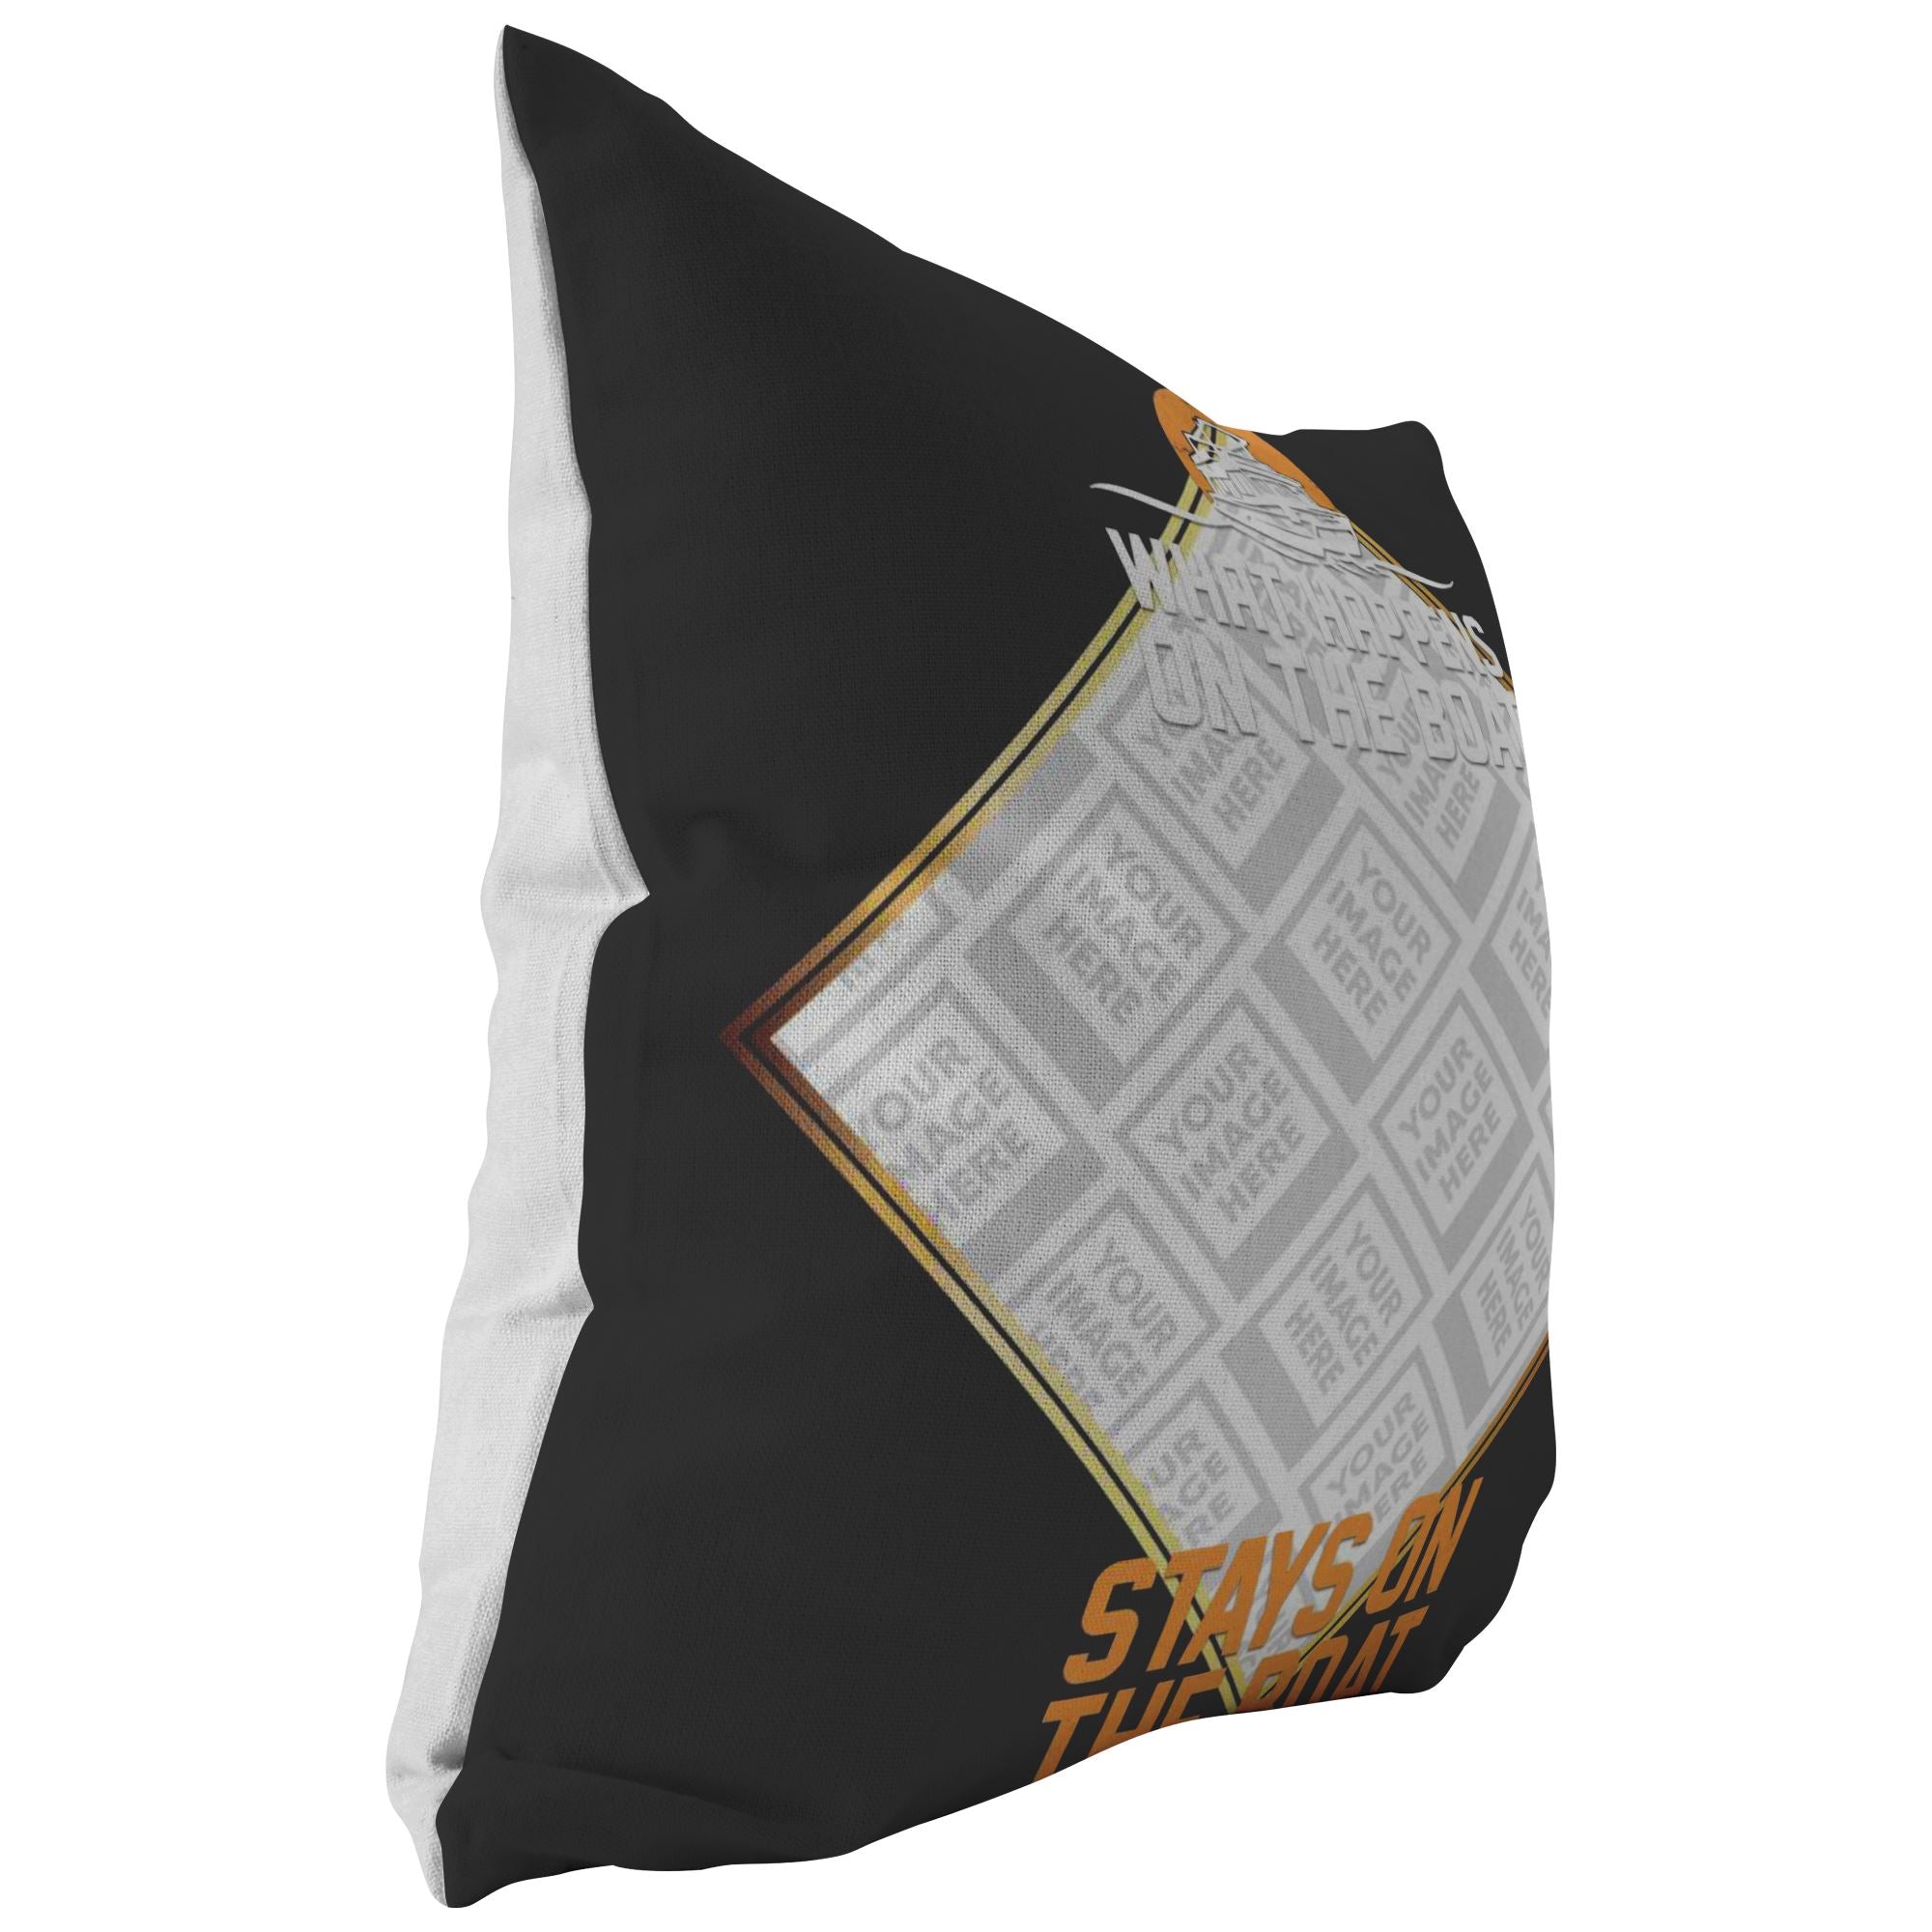 Personalized Pillow | What Happens On The Boat Stays On The Boat | Upload Your Own Picture! - Houseboat Kings